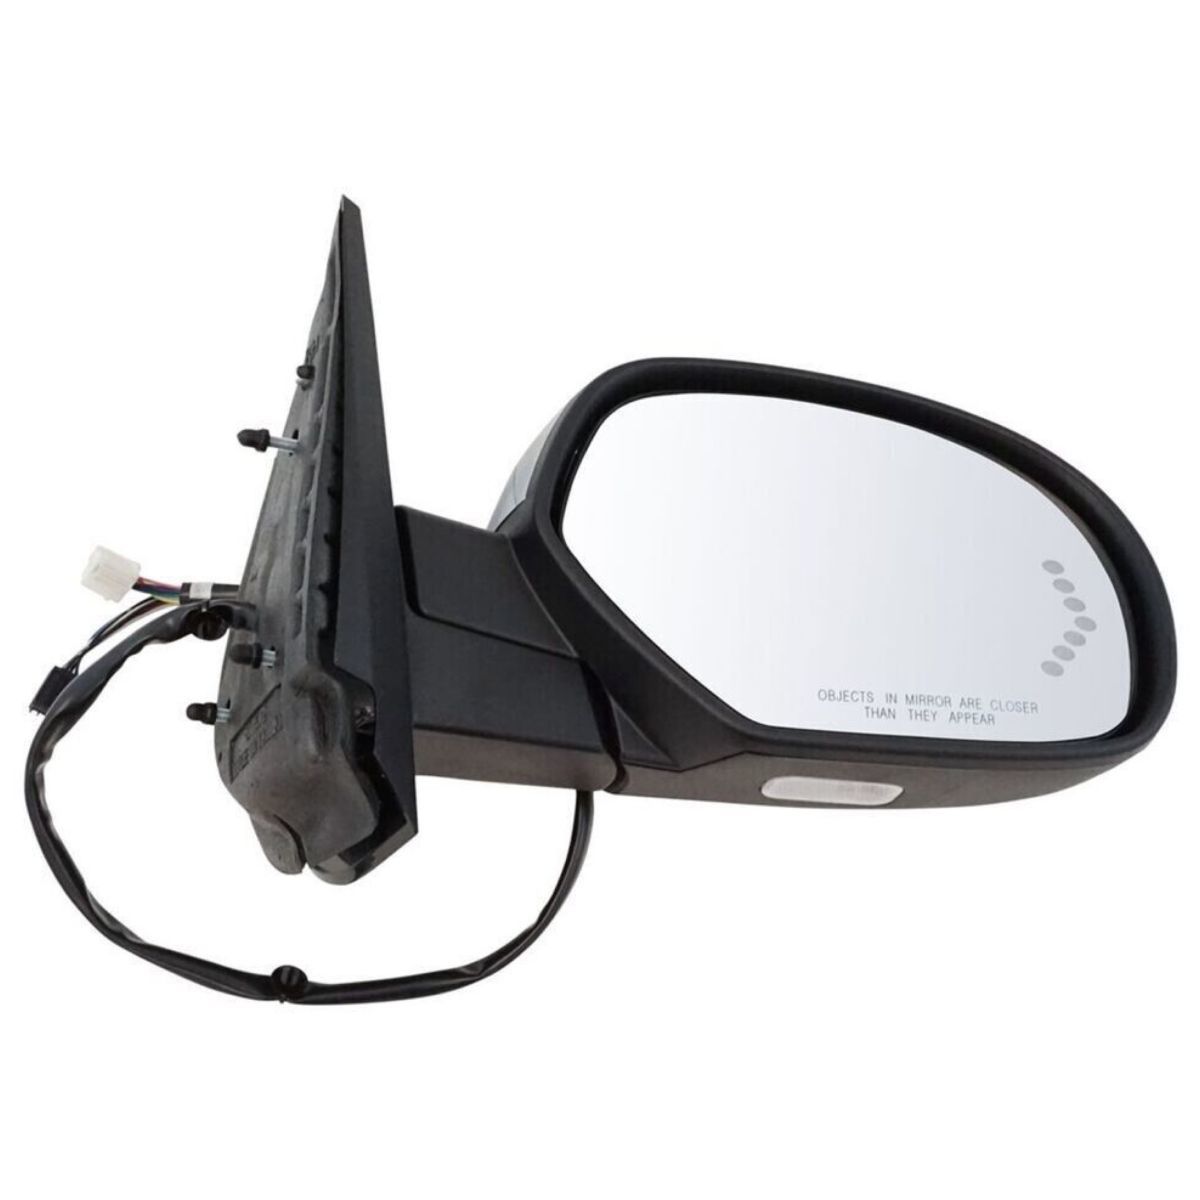  translation have tax included original type OE electromotive housing door mirror side mirror red luminescence right side RH cover chrome 07-14y Tahoe Suburban immediate payment stock goods 